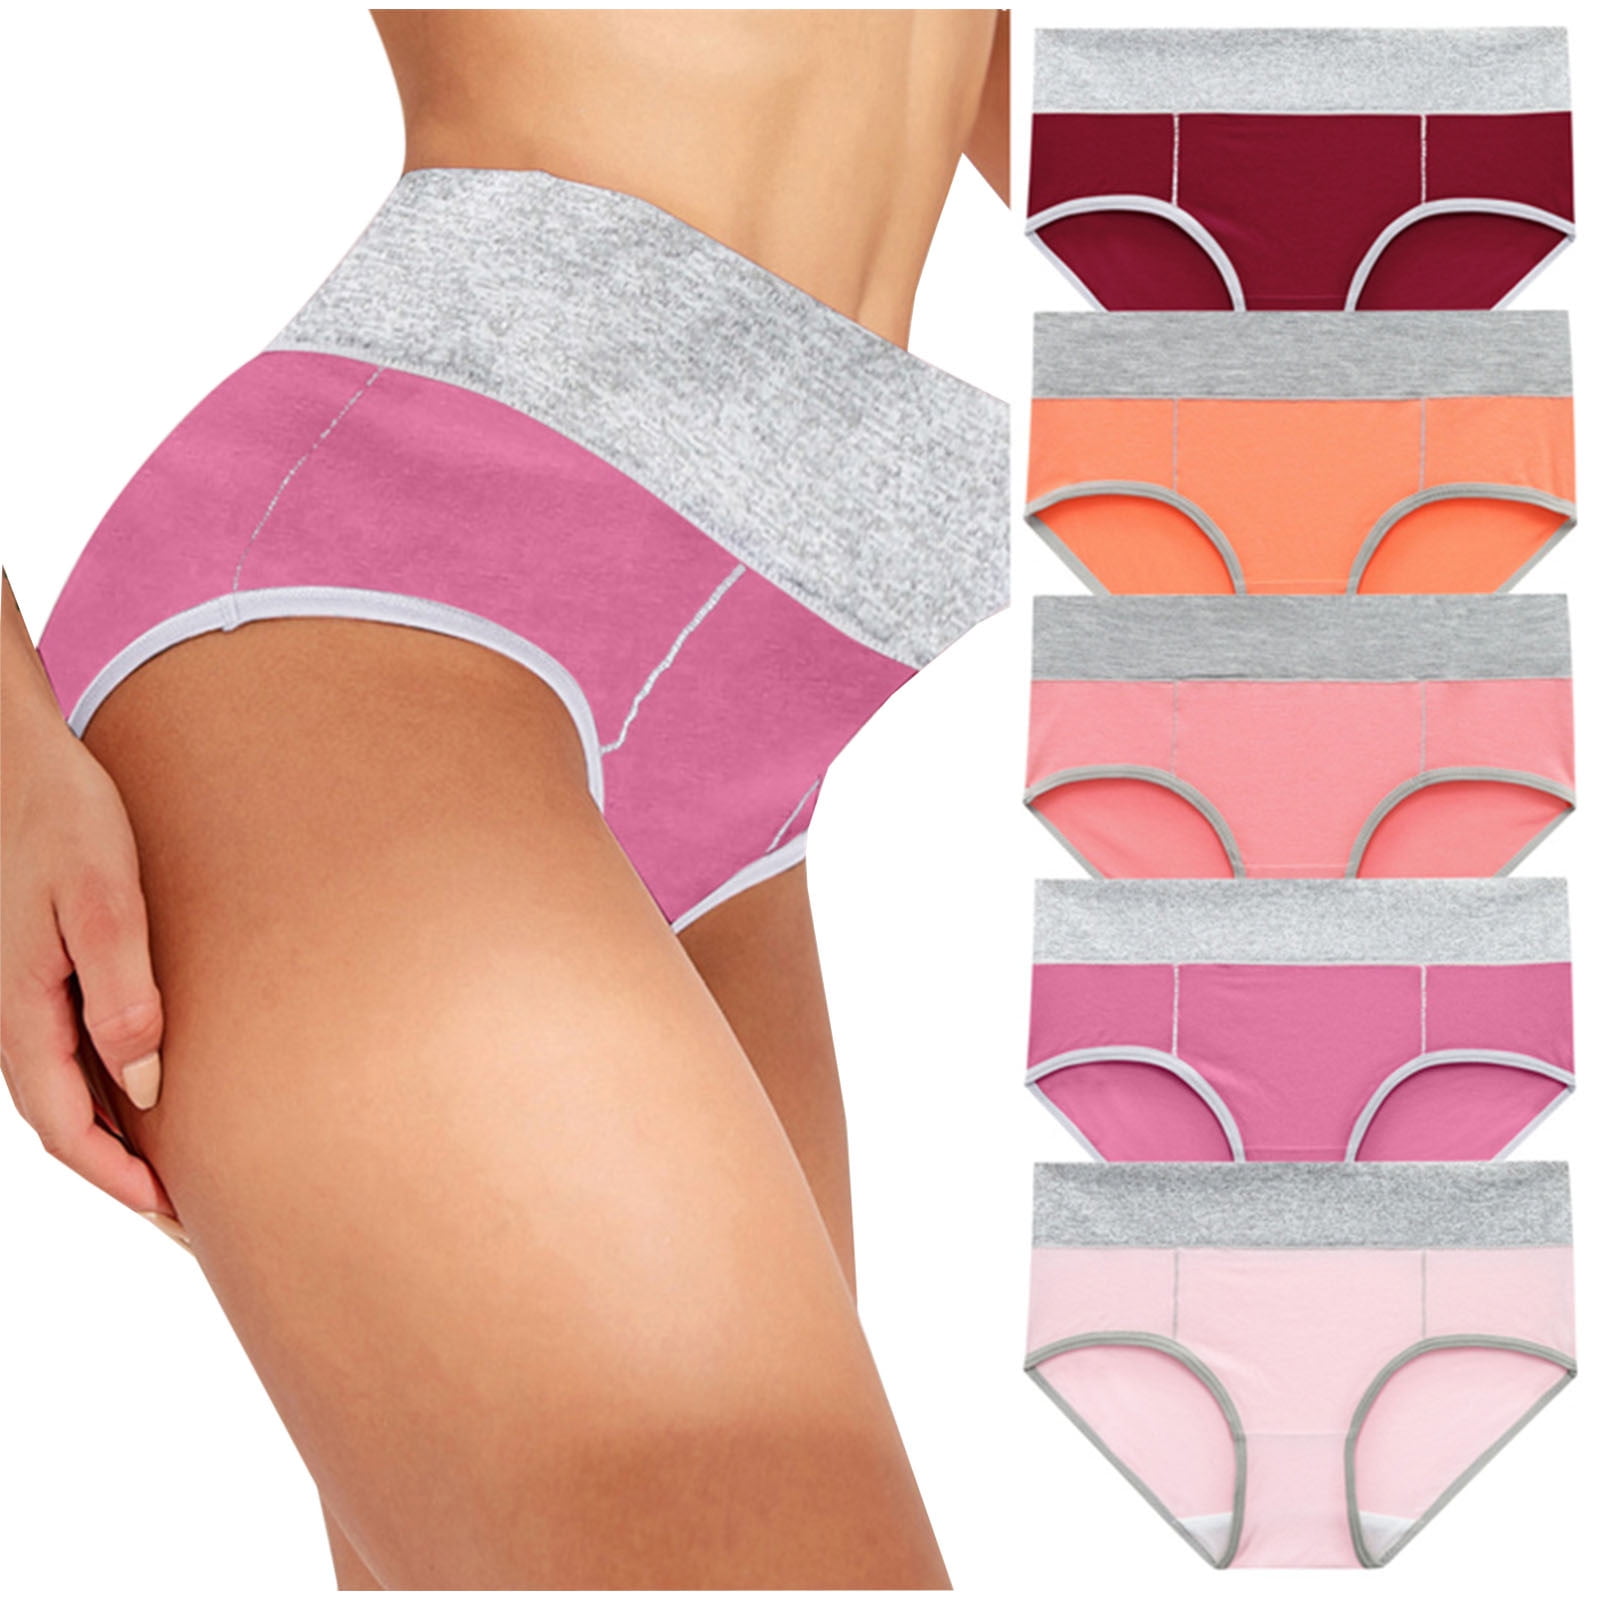 1 Pack of Panty Many Colors & Sizes New Genie Panty Panties Underwear